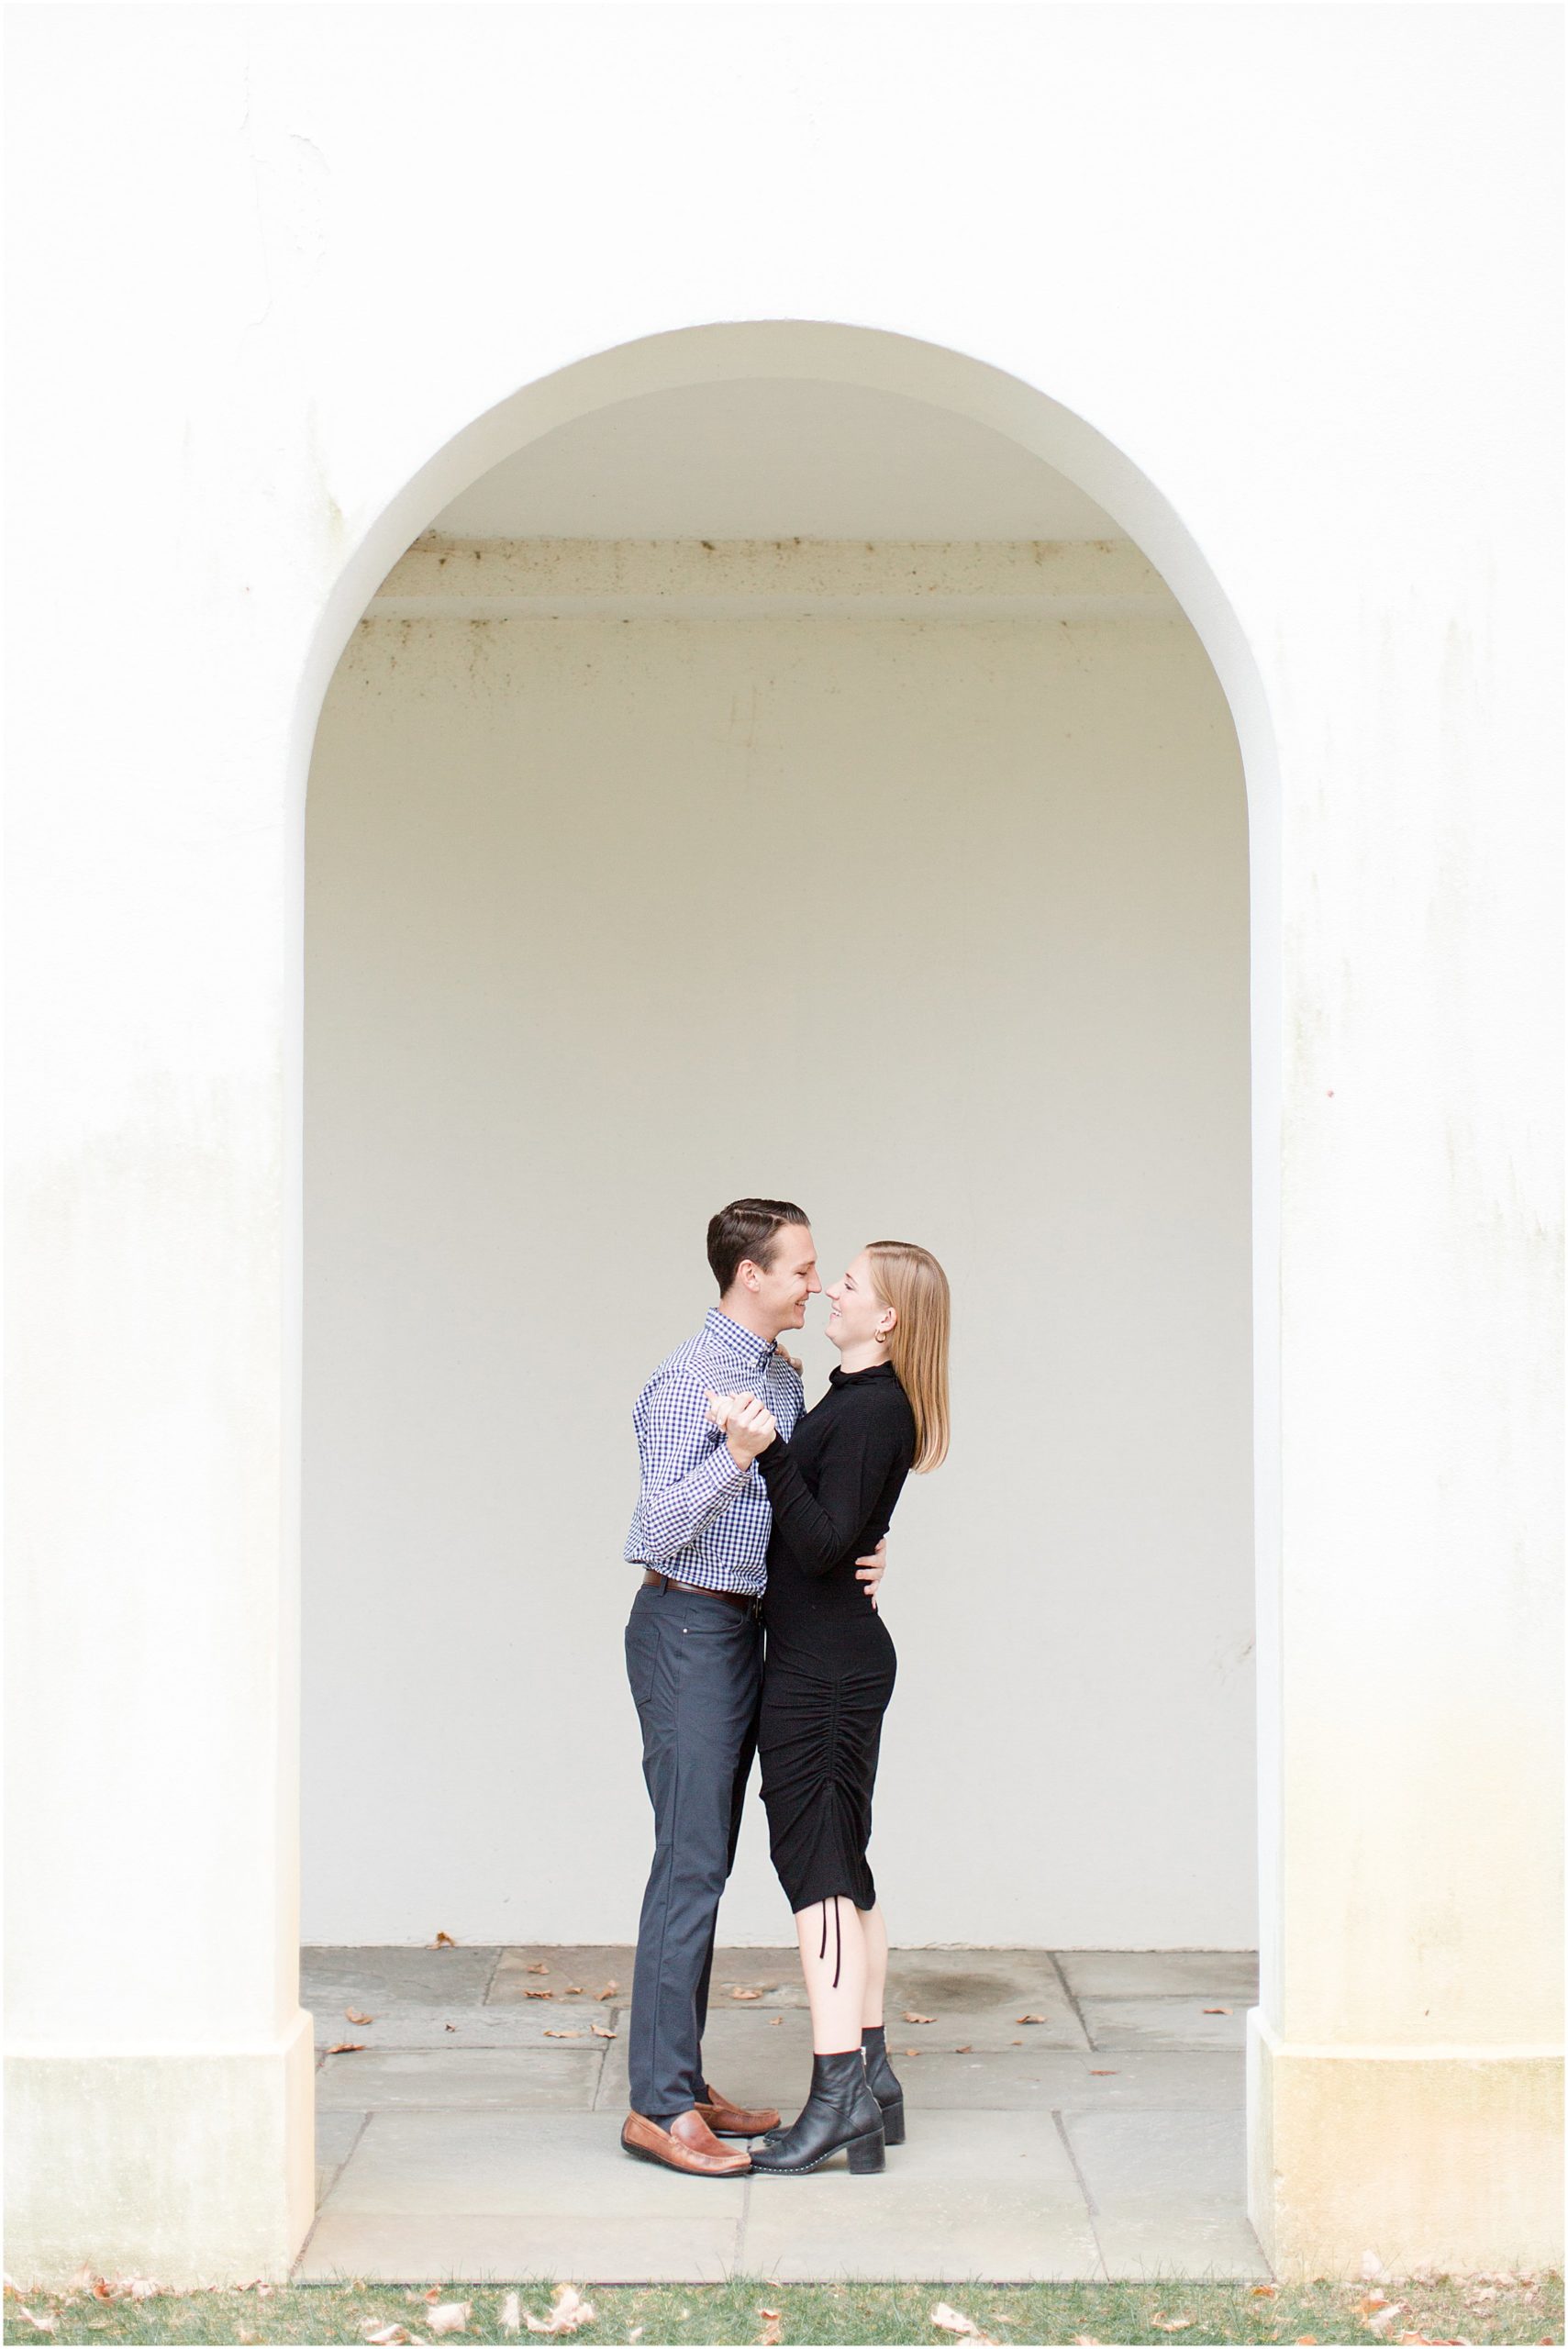 Autumn Newfields Engagement Session_0008.jpg